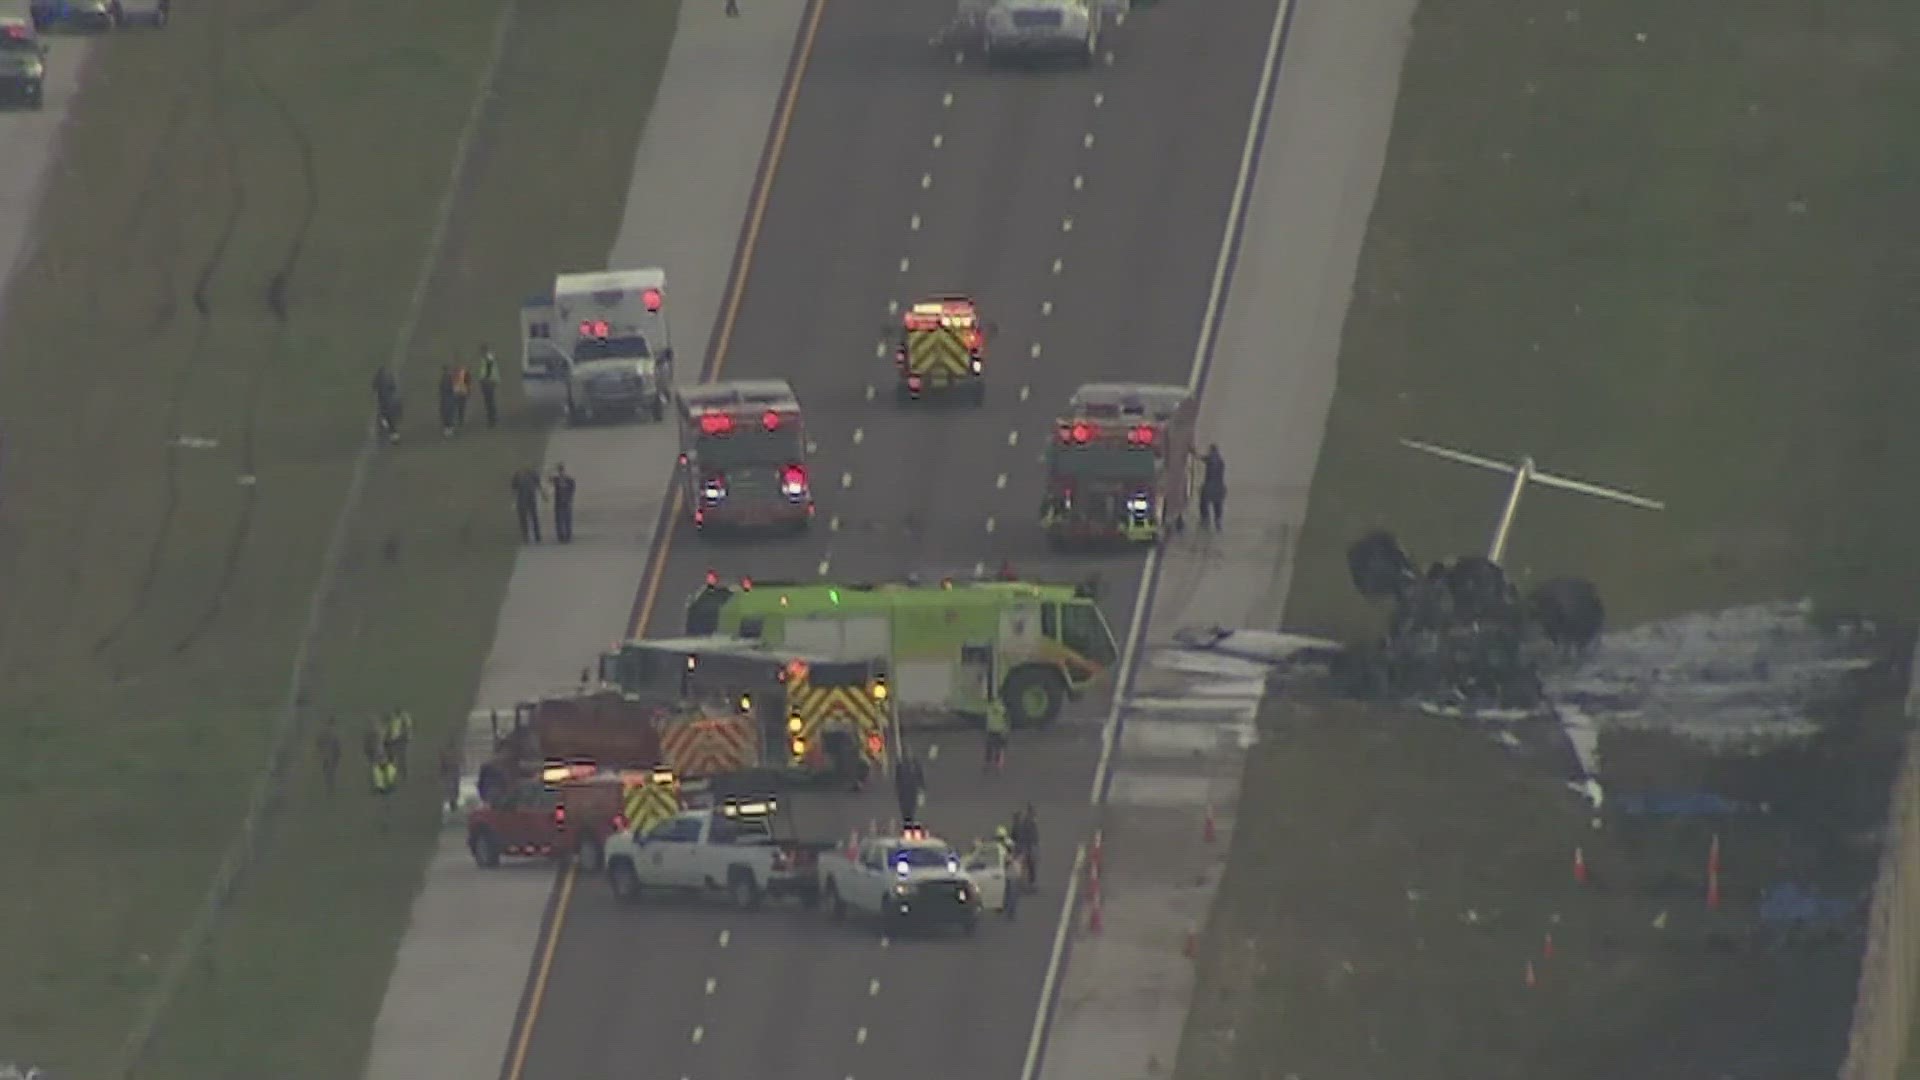 The Florida Highway Patrol told 3News sister station WTSP that the plane collided with a vehicle as it attempted to land on Interstate 75 in Collier County.